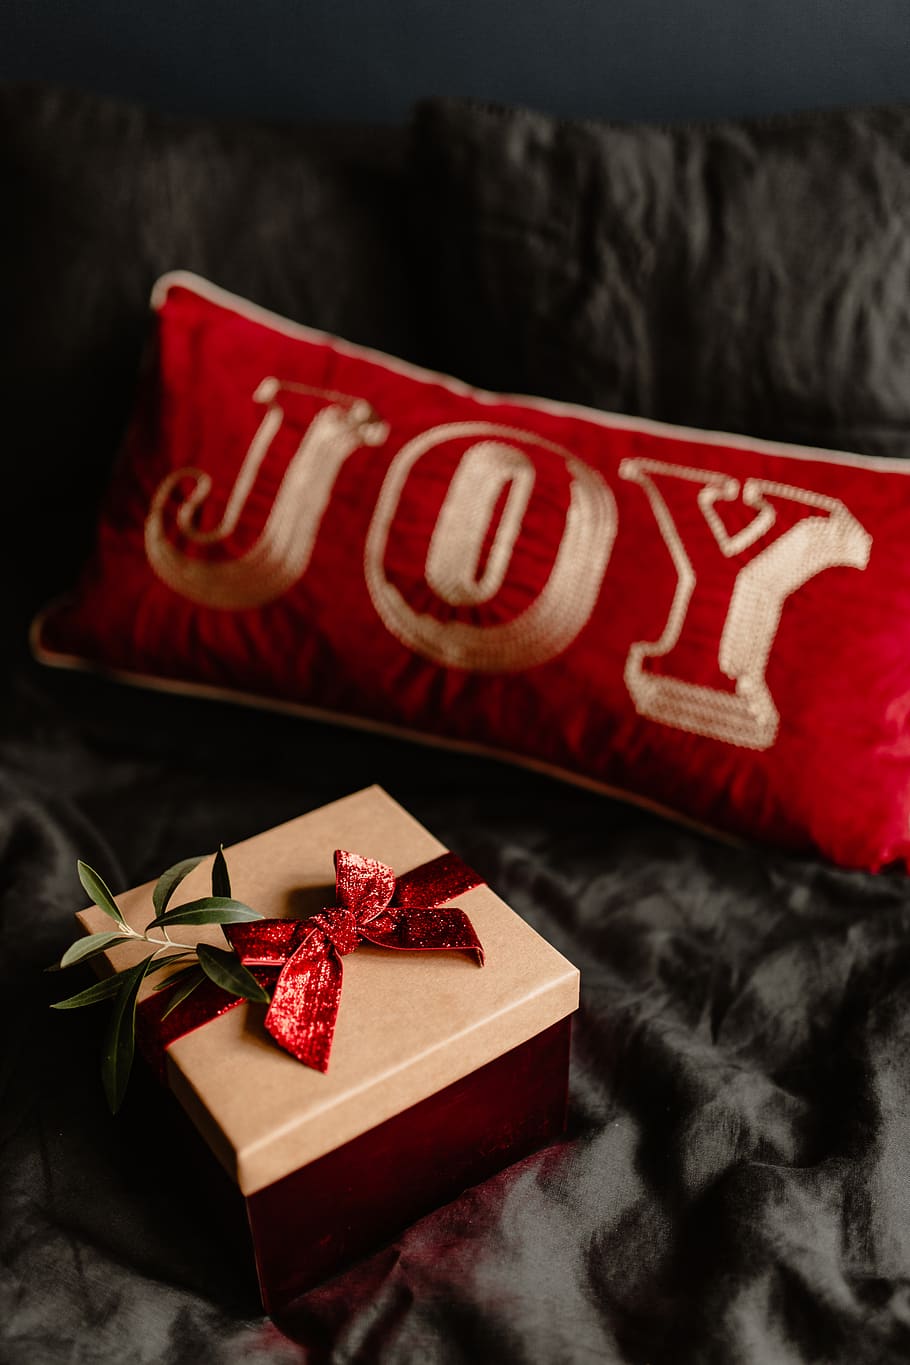 christmas gifts, presents, xmas, linen, bed, red, black, bedding, december, winter